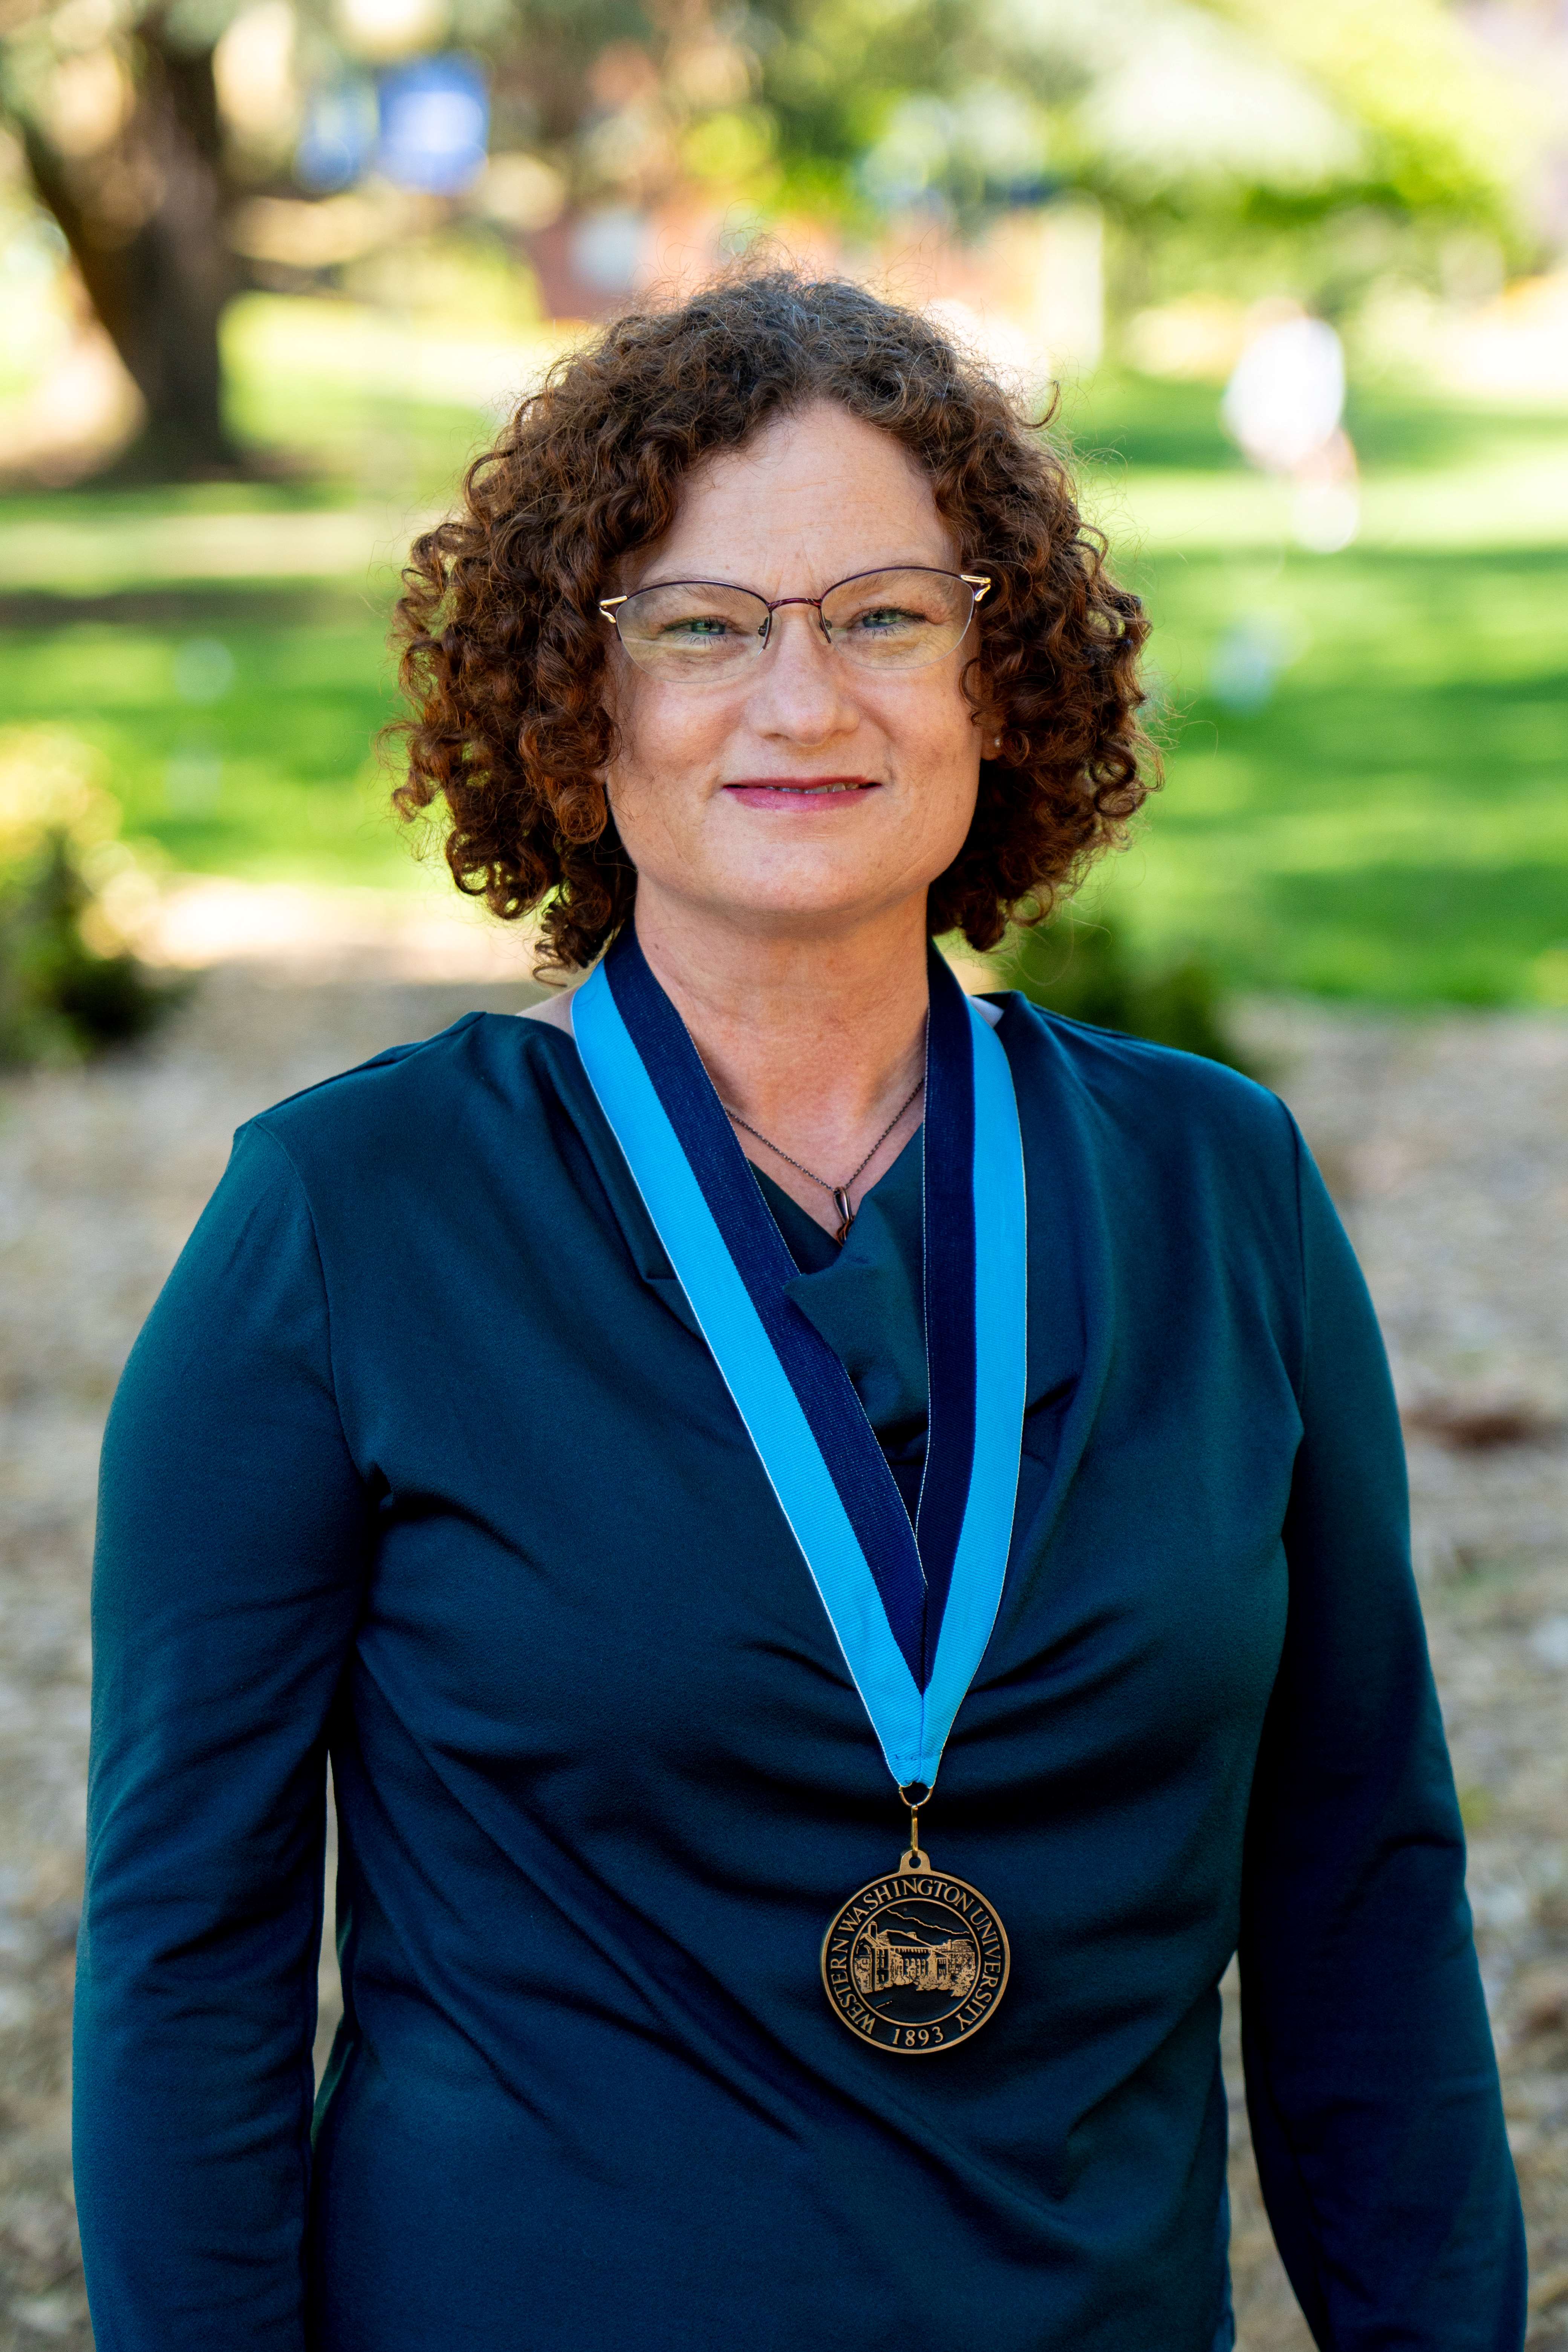 Kimberly Ayre standing with trees in the background and wearing a WWU award medallion